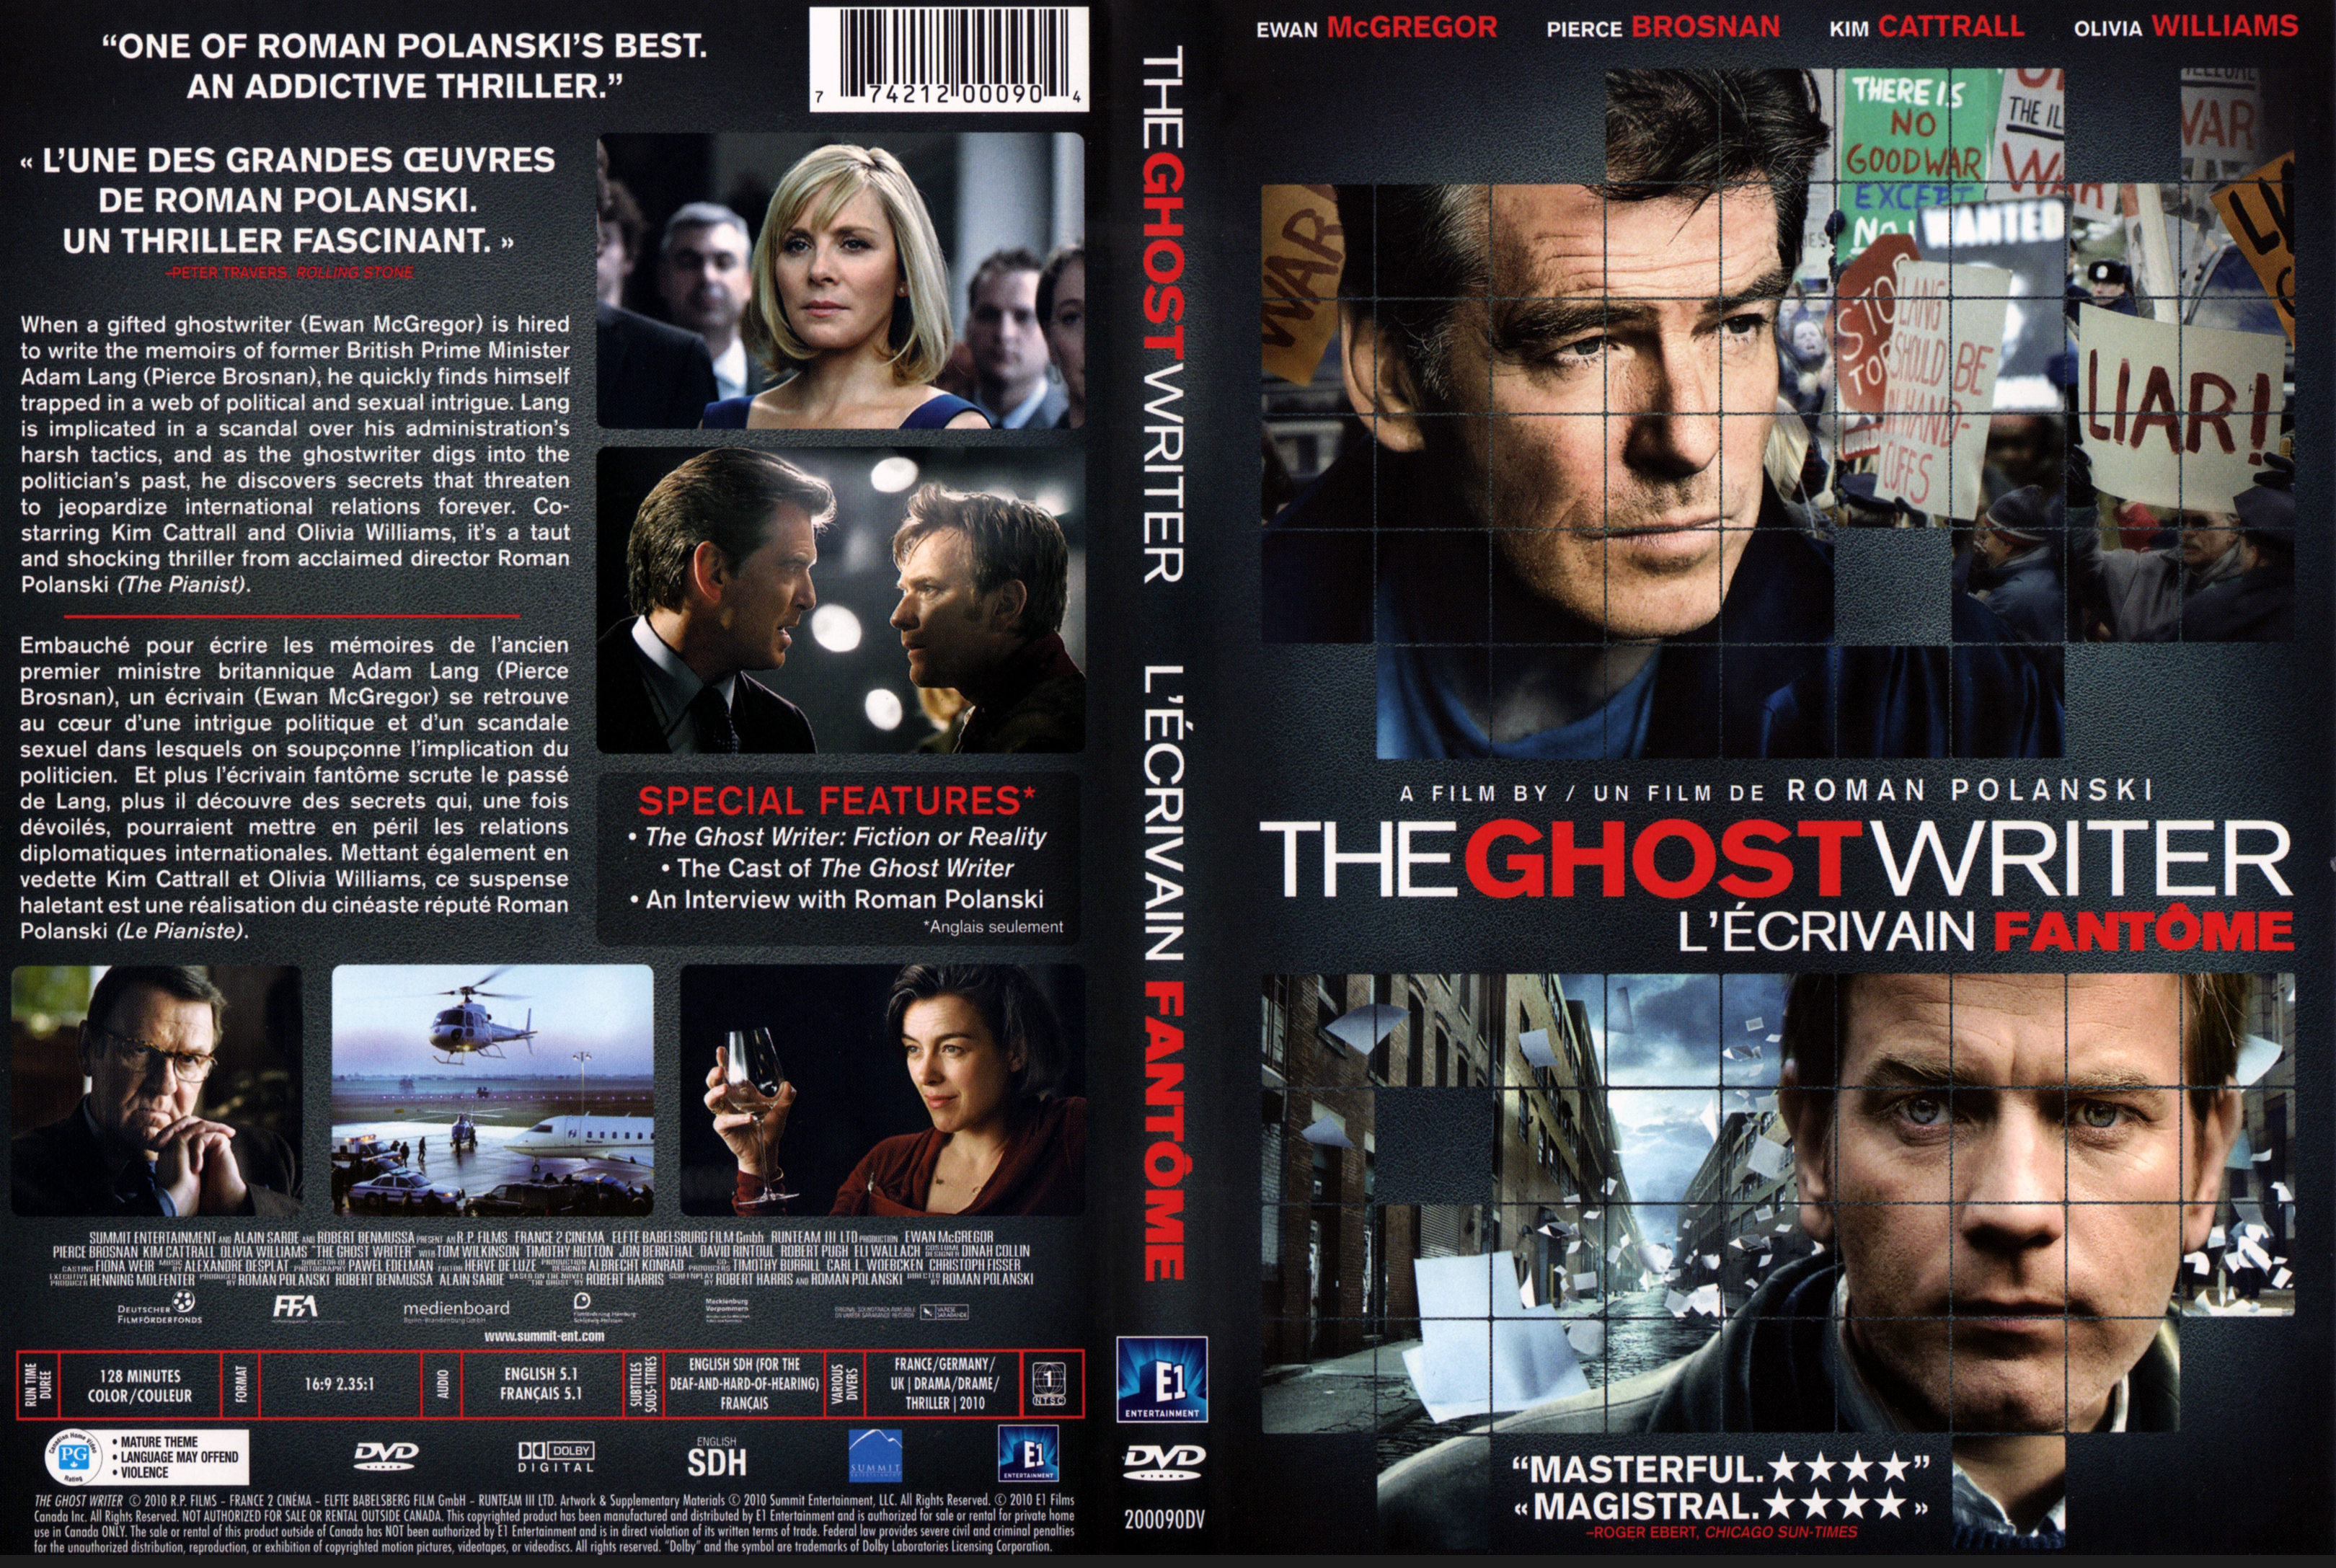 Jaquette DVD The ghost writer - L